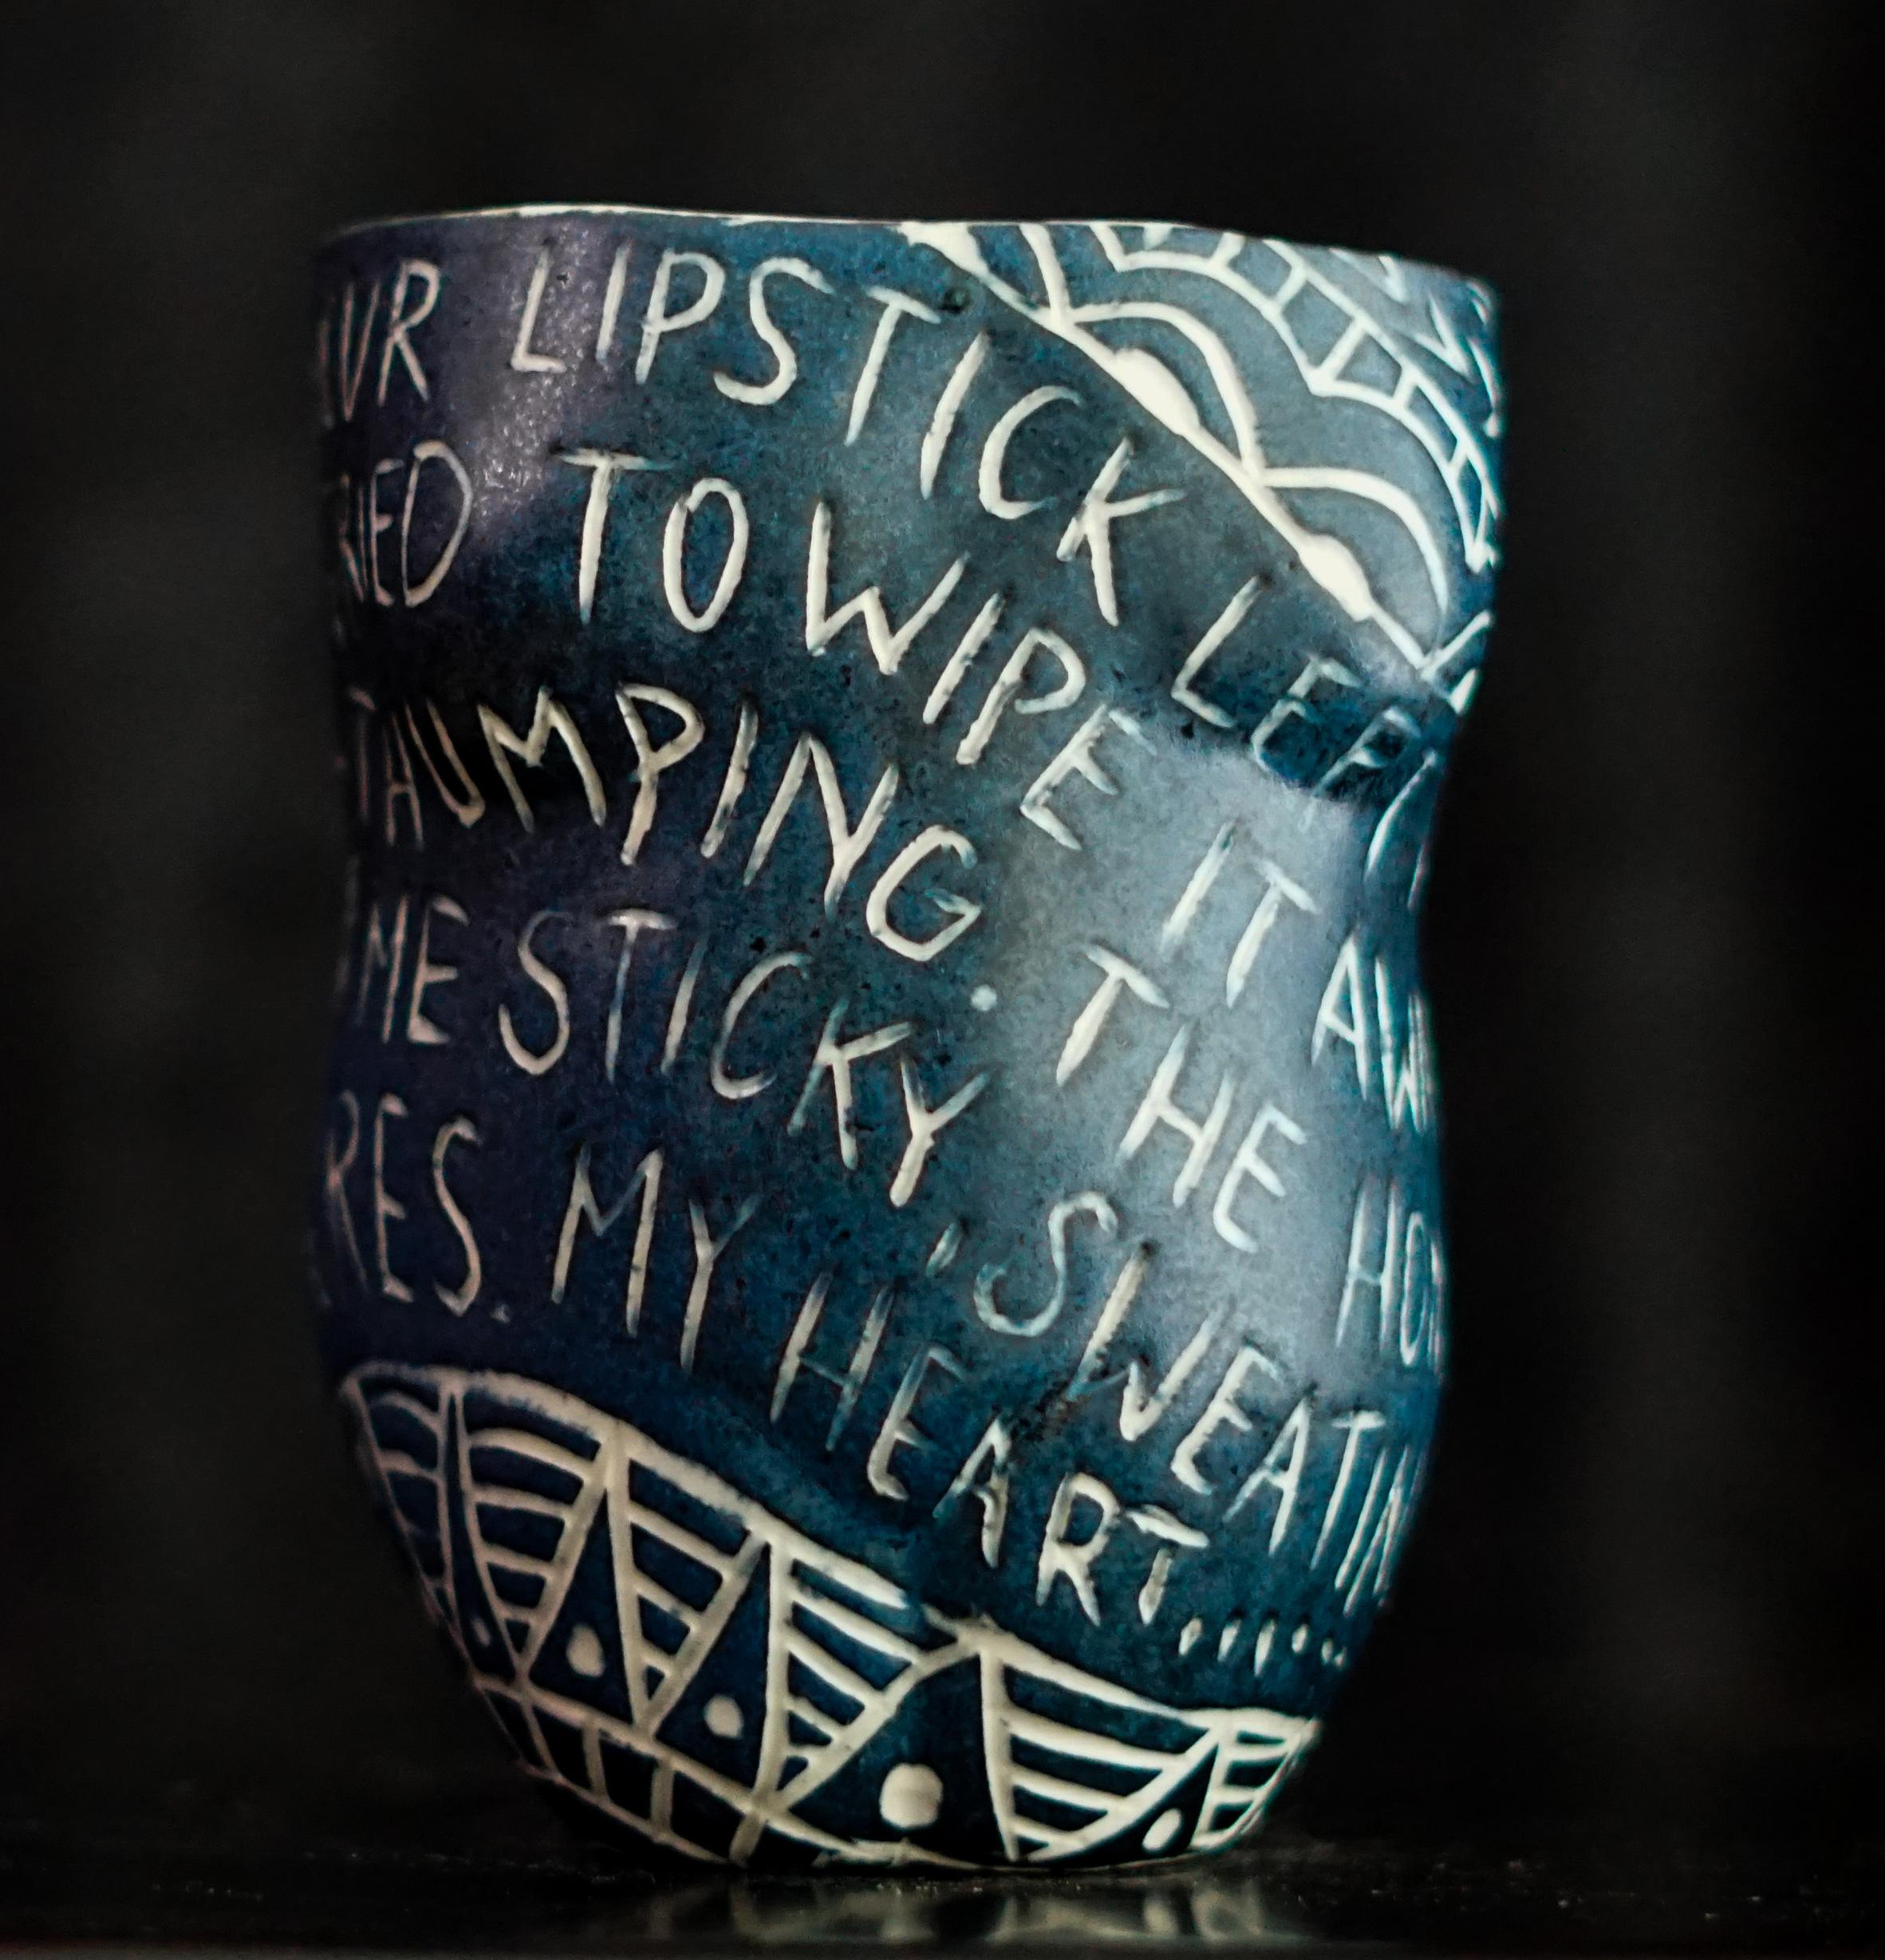 Alex Hodge Abstract Sculpture - “Your Lipstick Left a Bruise..” Porcelain cup with sgraffito detailing